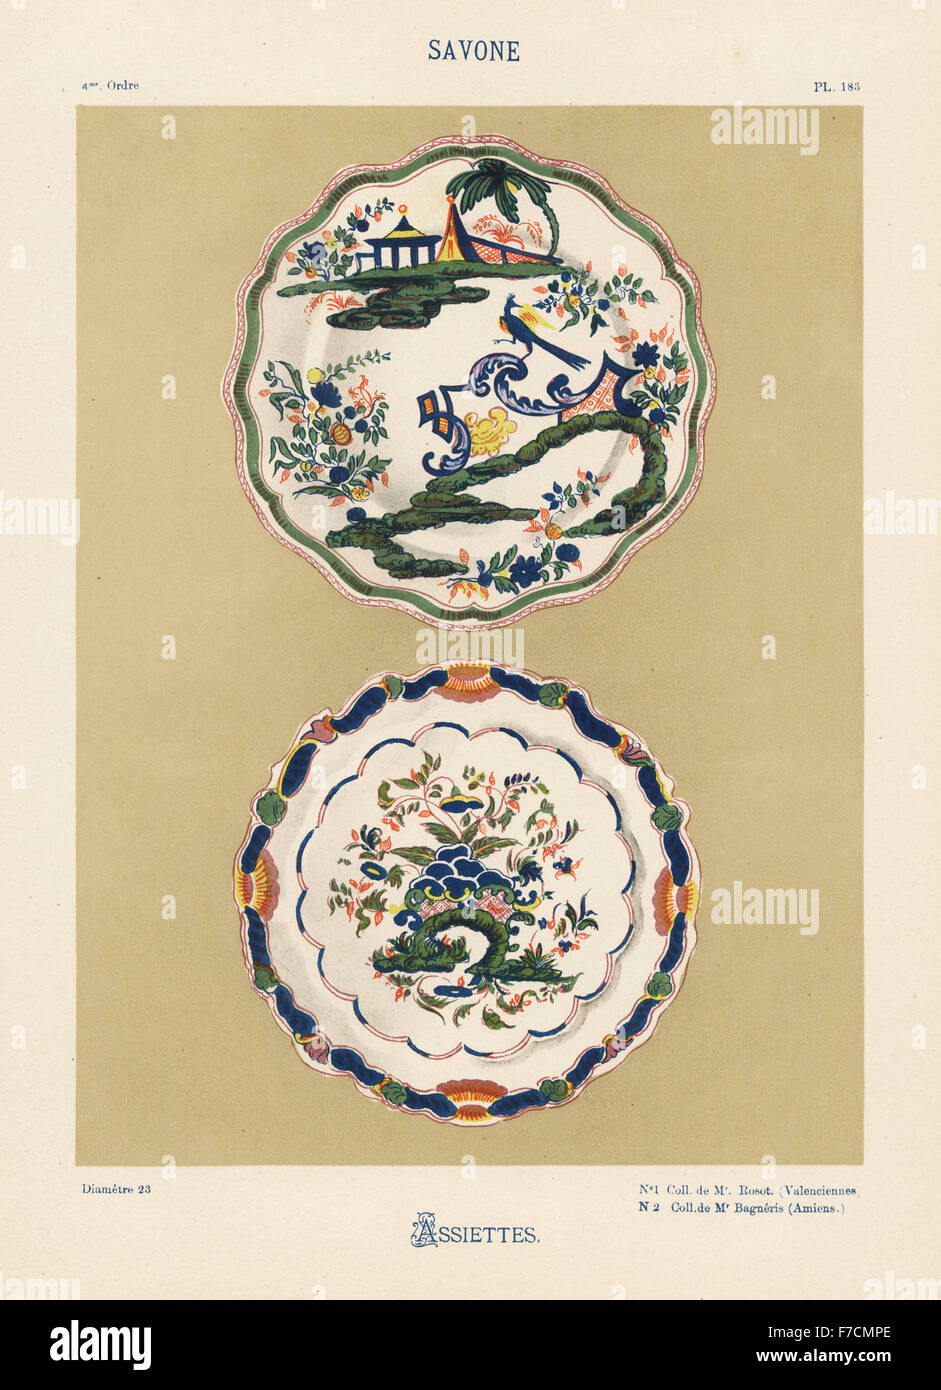 Plates from Savona, Italy, 18th century, with Oriental landscapes, flowers and birds. Hand-finished chromolithograph from Ris Paquot's General History of Ancient French and Foreign Glazed Pottery, Chez l'Auteur, Paris, 1874. Stock Photo